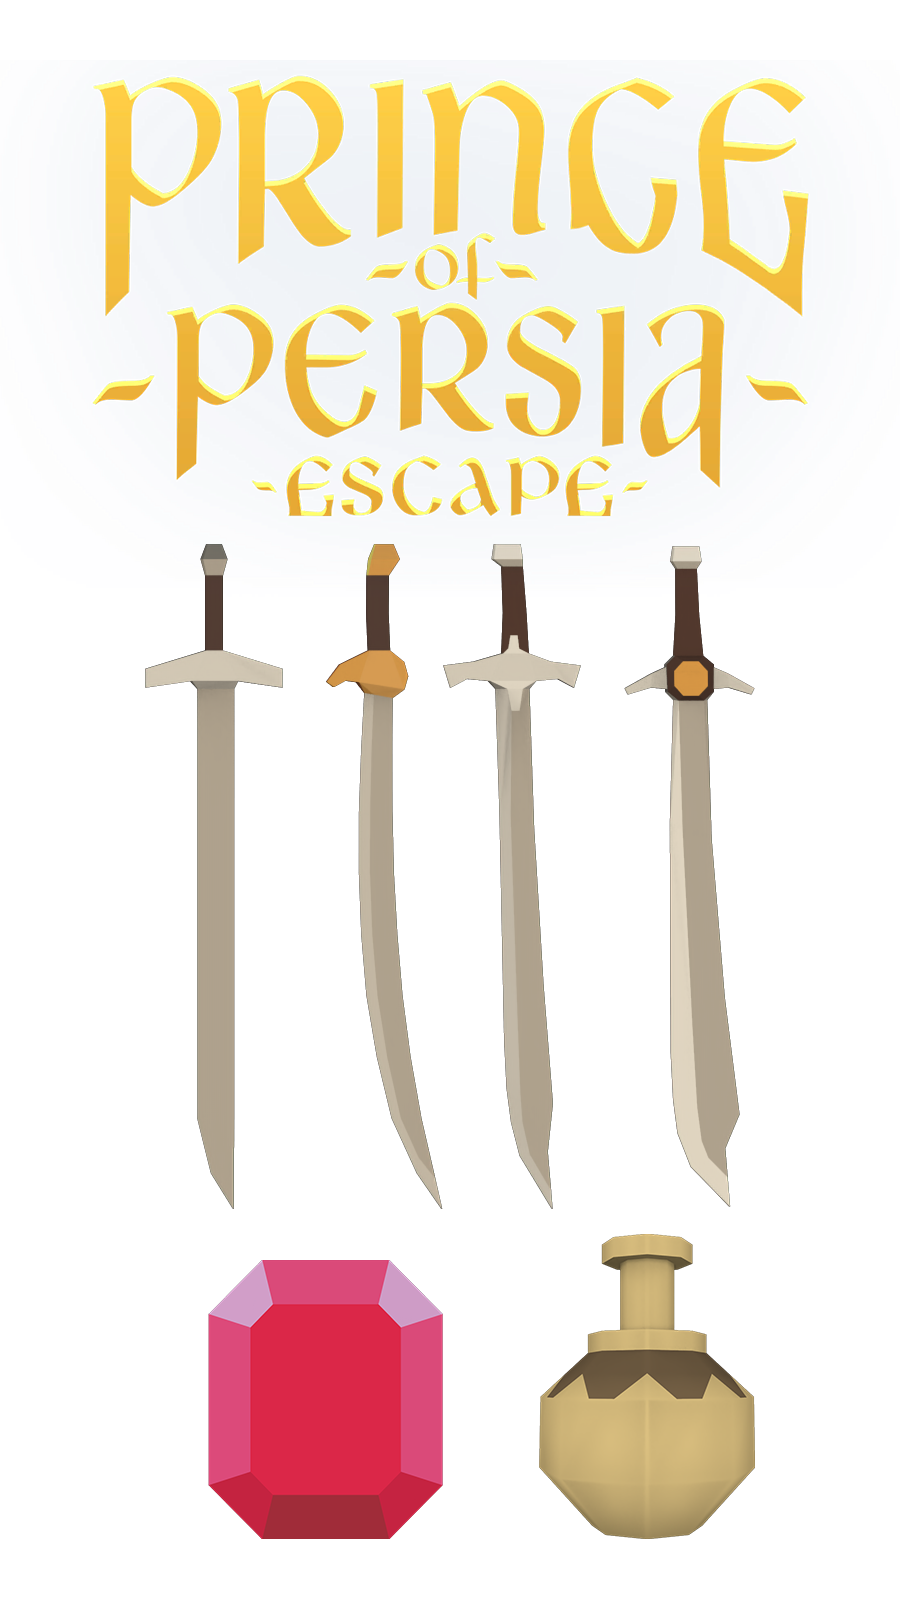 Prince of Persia: The Two Thrones (Weapons) by Maxdemon6 on DeviantArt